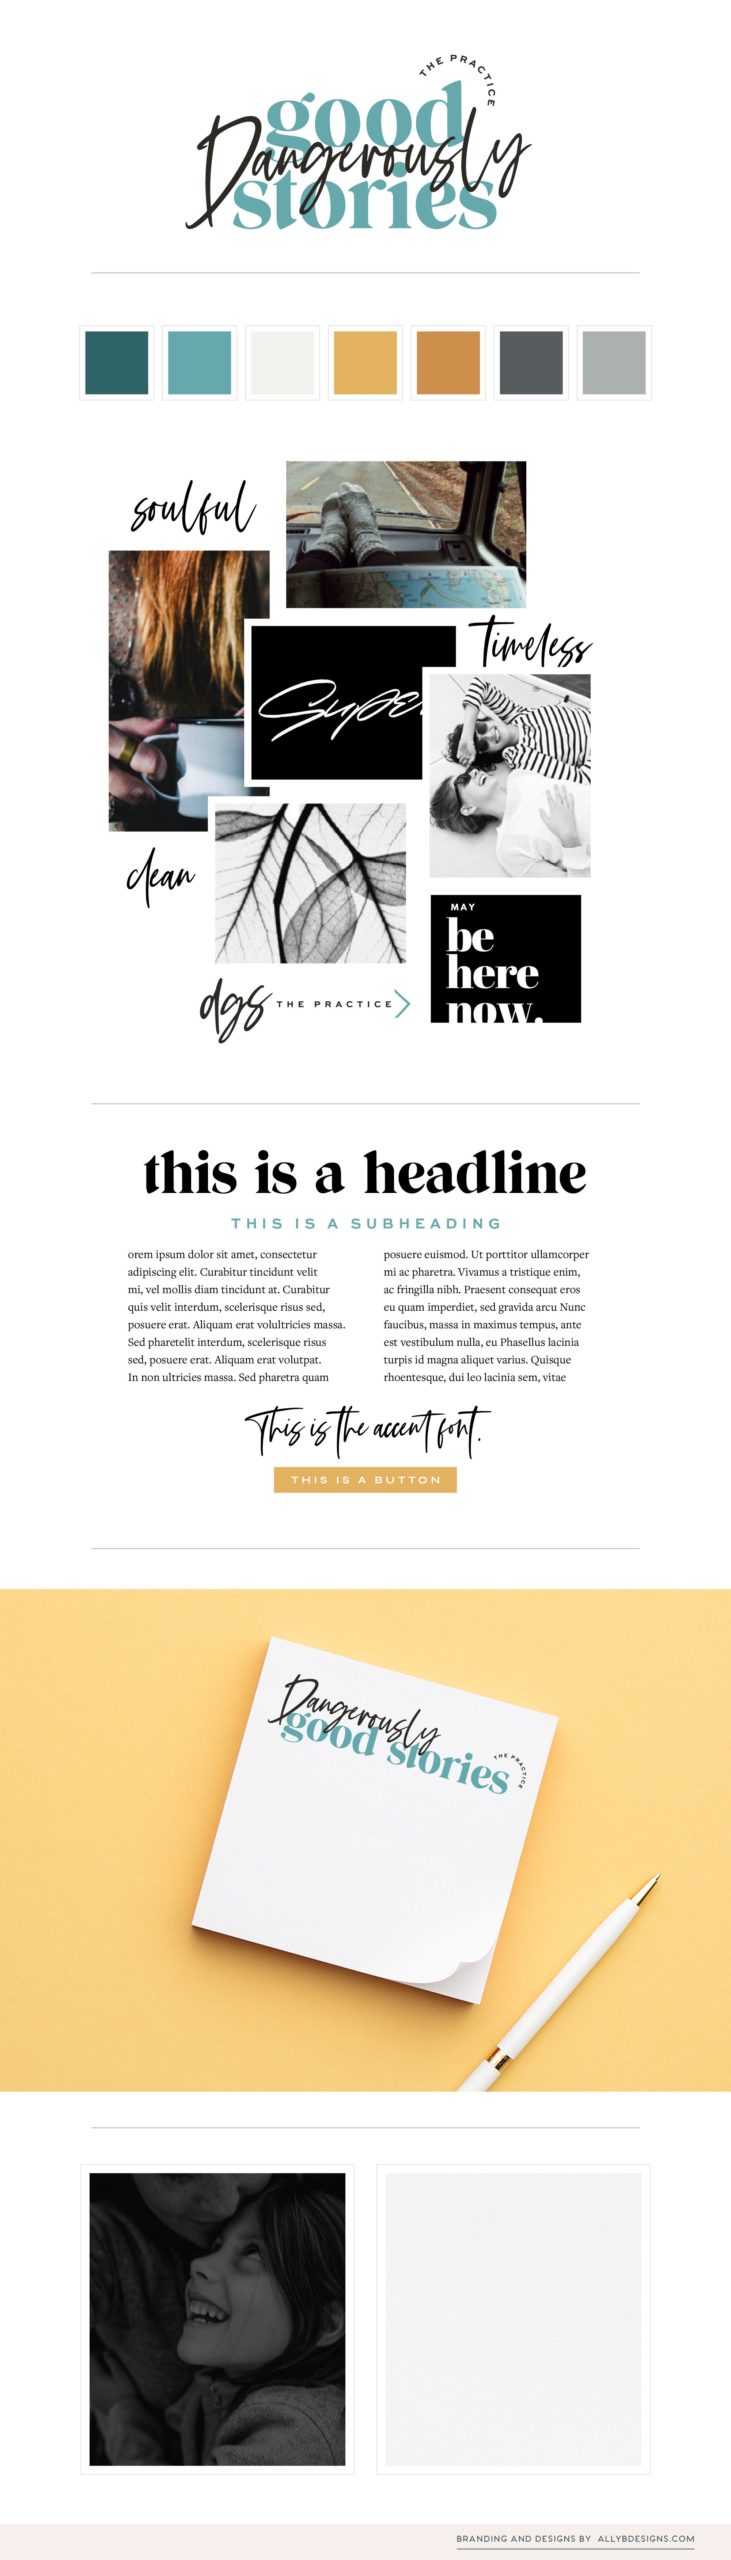 Custom Brand Project for Dangerously Good Stories with Marie Masse | Bold, Soulful, and Impactful describes the brand design